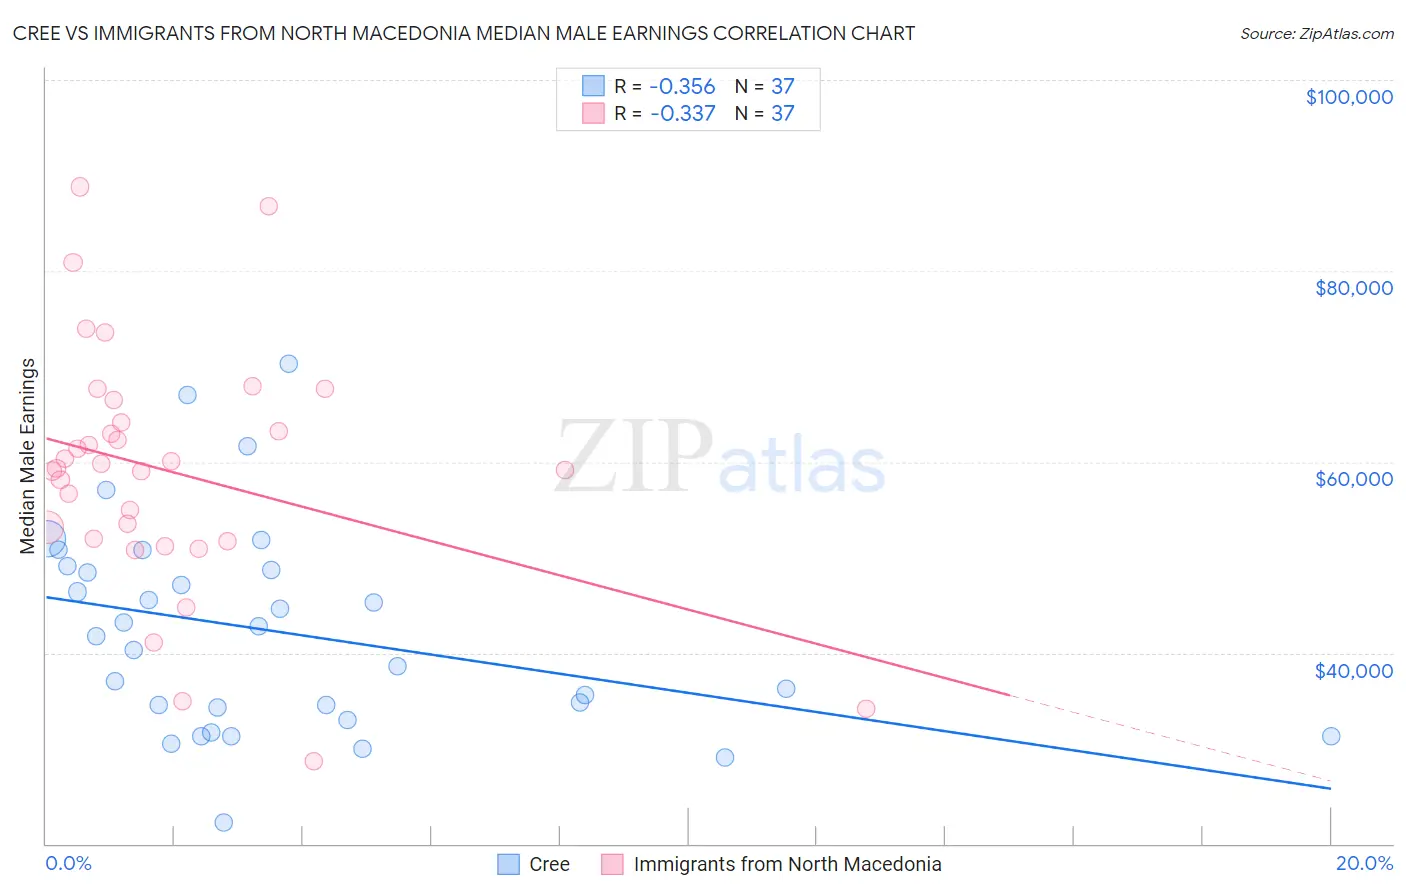 Cree vs Immigrants from North Macedonia Median Male Earnings